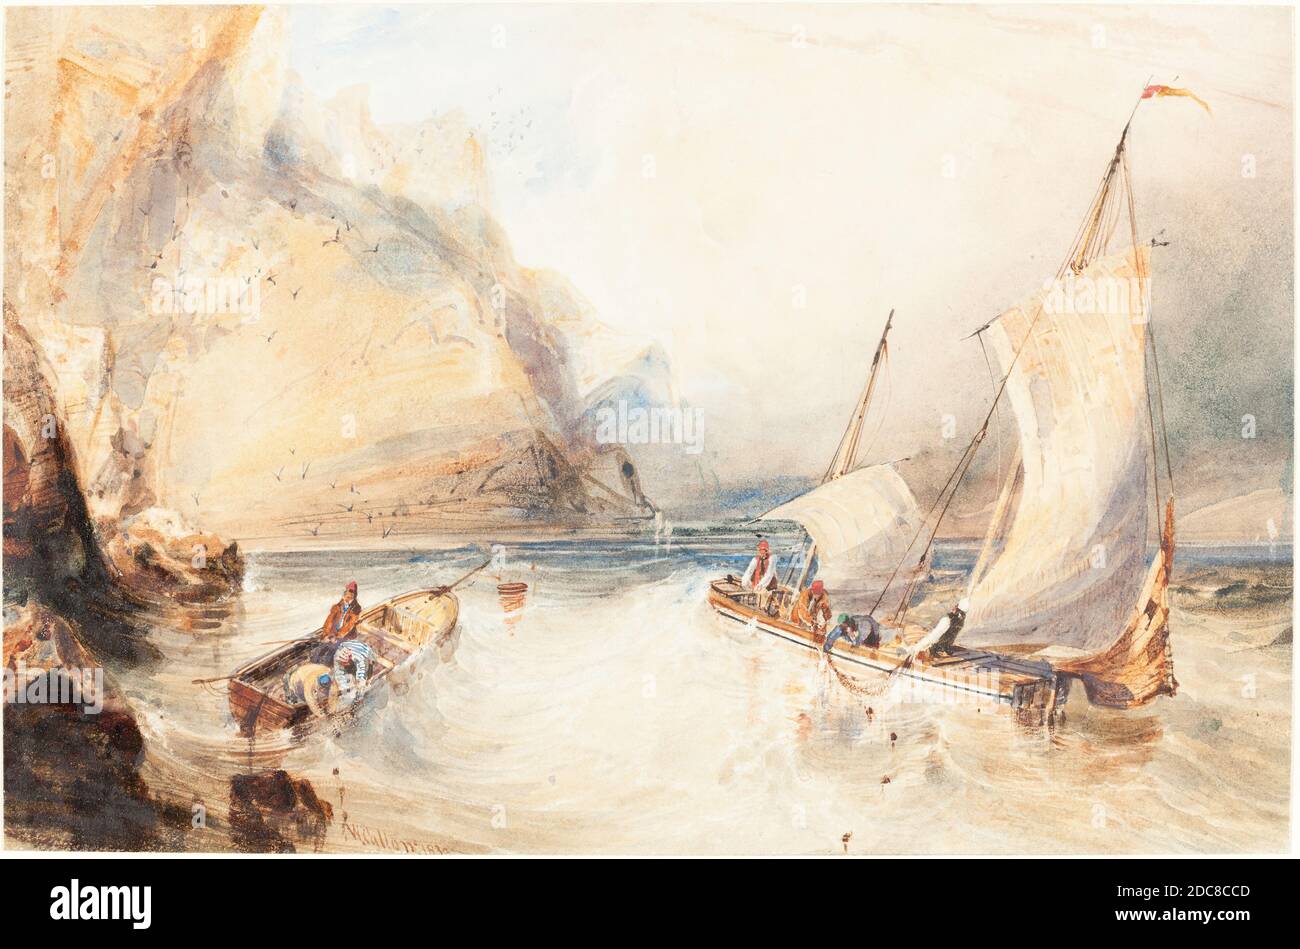 William Callow, (artist), British, 1812 - 1908, French Fishing Boats off a Rocky Coast, 1833, watercolor and white gouache over graphite on laid paper, Overall: 17.5 x 26.5 cm (6 7/8 x 10 7/16 in.), overall: 27.9 x 35.6 cm (11 x 14 in Stock Photo